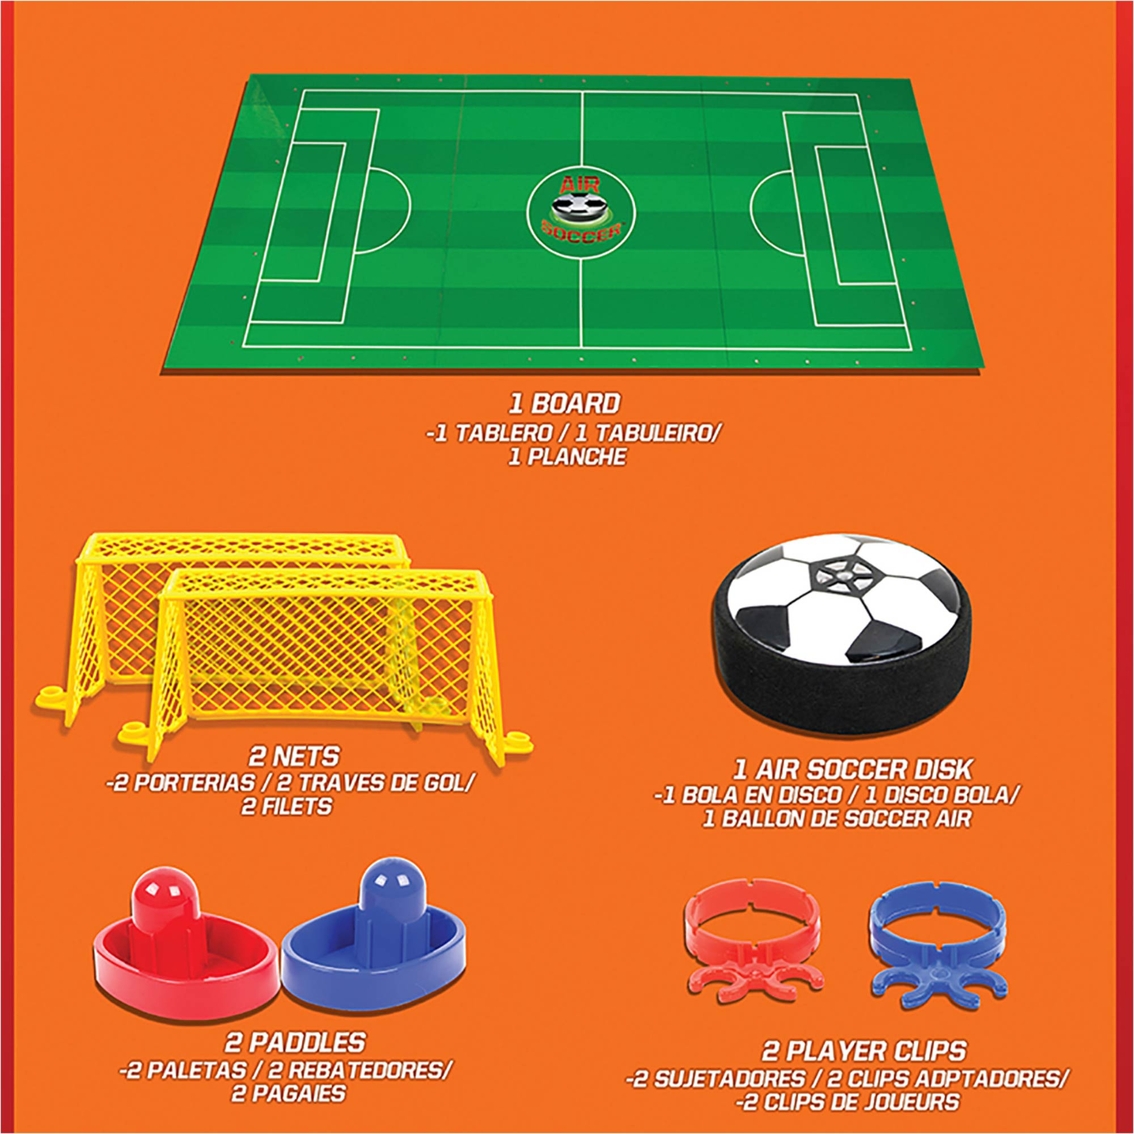 Maccabi Art Air Soccer Tabletop Board Game - Image 4 of 5